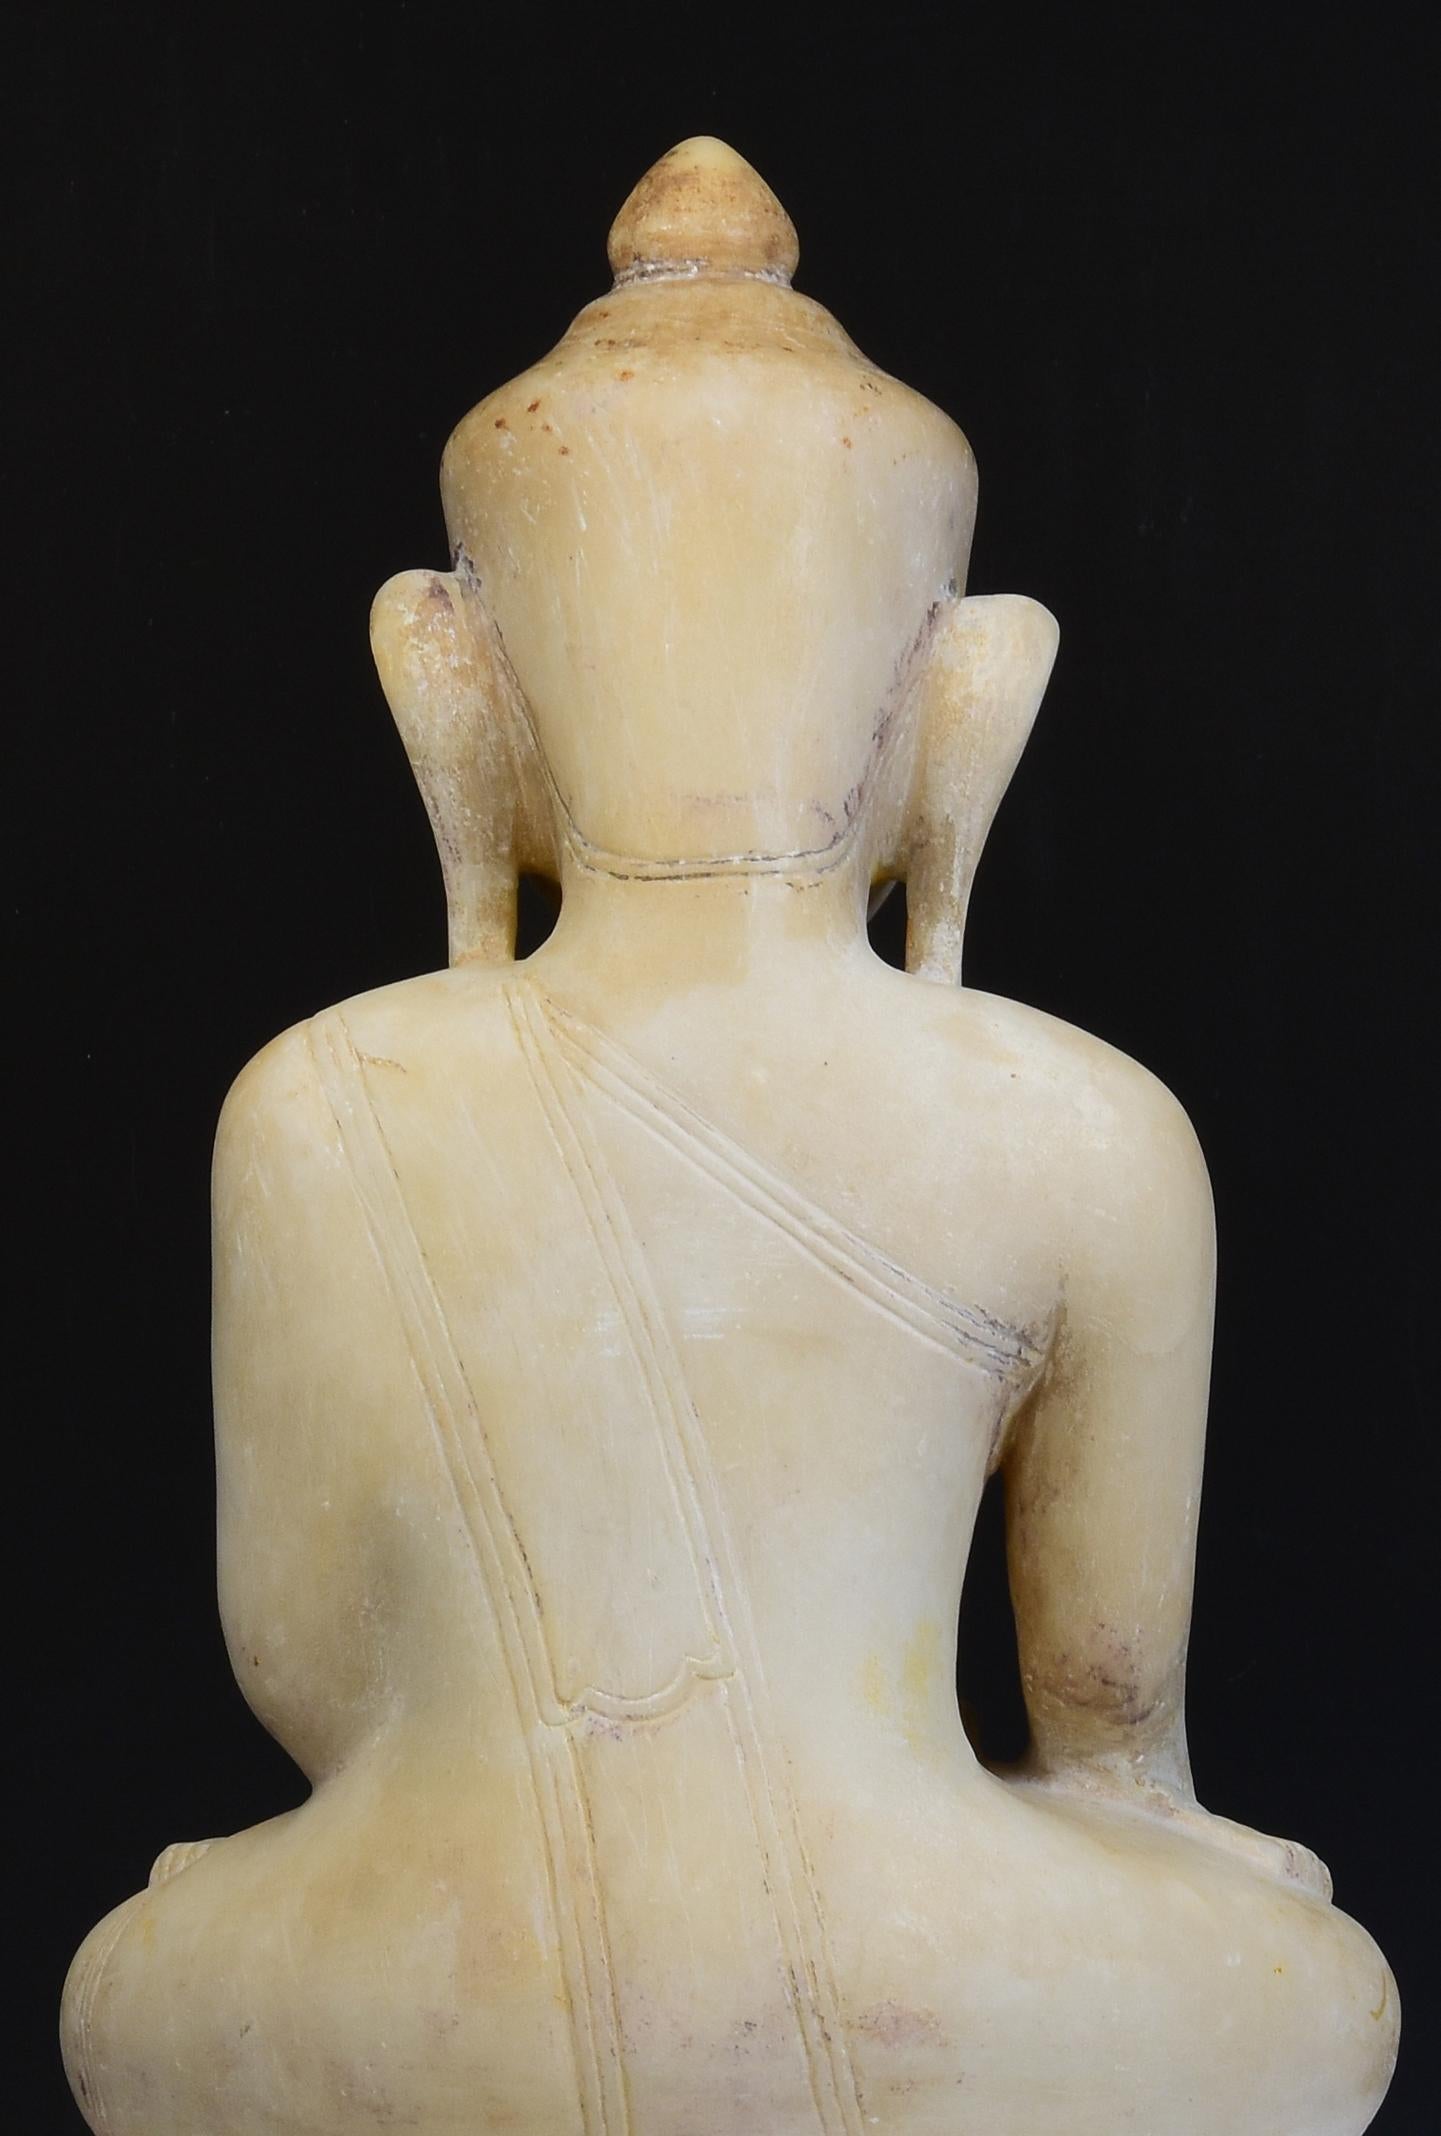 17th - 18th Century, Shan, Antique Burmese Alabaster Marble Seated Buddha Statue 7